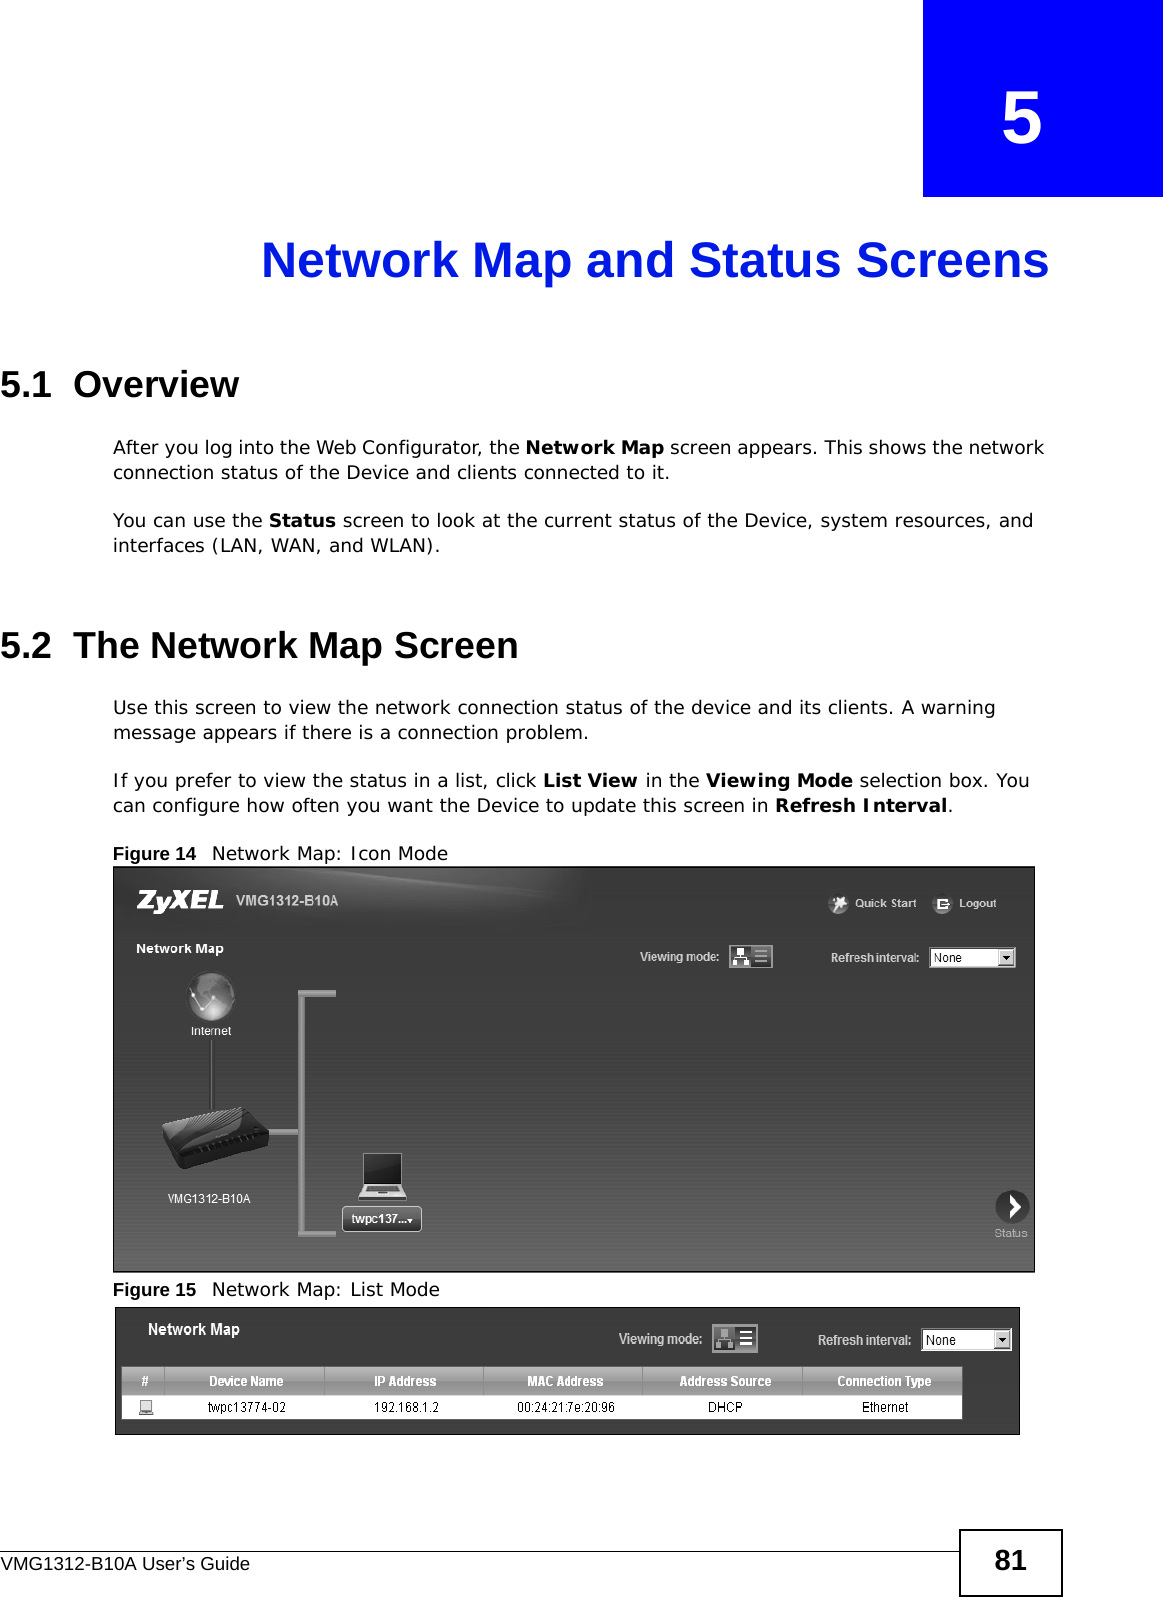 VMG1312-B10A User’s Guide 81CHAPTER   5Network Map and Status Screens5.1  OverviewAfter you log into the Web Configurator, the Network Map screen appears. This shows the network connection status of the Device and clients connected to it. You can use the Status screen to look at the current status of the Device, system resources, and interfaces (LAN, WAN, and WLAN). 5.2  The Network Map ScreenUse this screen to view the network connection status of the device and its clients. A warning message appears if there is a connection problem. If you prefer to view the status in a list, click List View in the Viewing Mode selection box. You can configure how often you want the Device to update this screen in Refresh Interval.Figure 14   Network Map: Icon Mode Figure 15   Network Map: List Mode